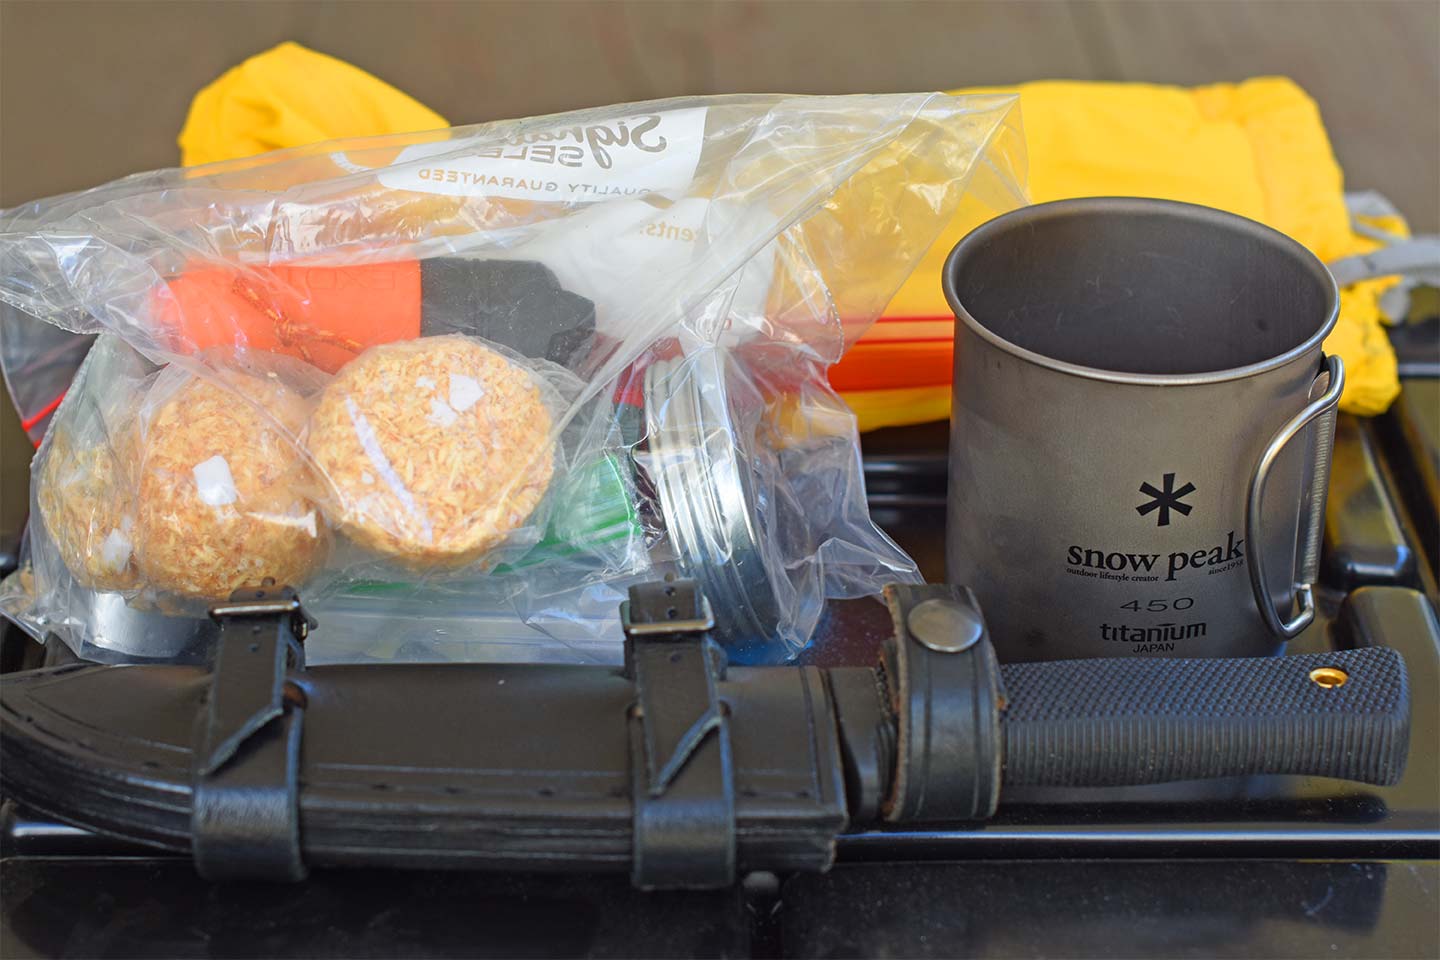 Fixed-blade knife, ziplock bag with fire starters and matches, with a yellow bag in the background